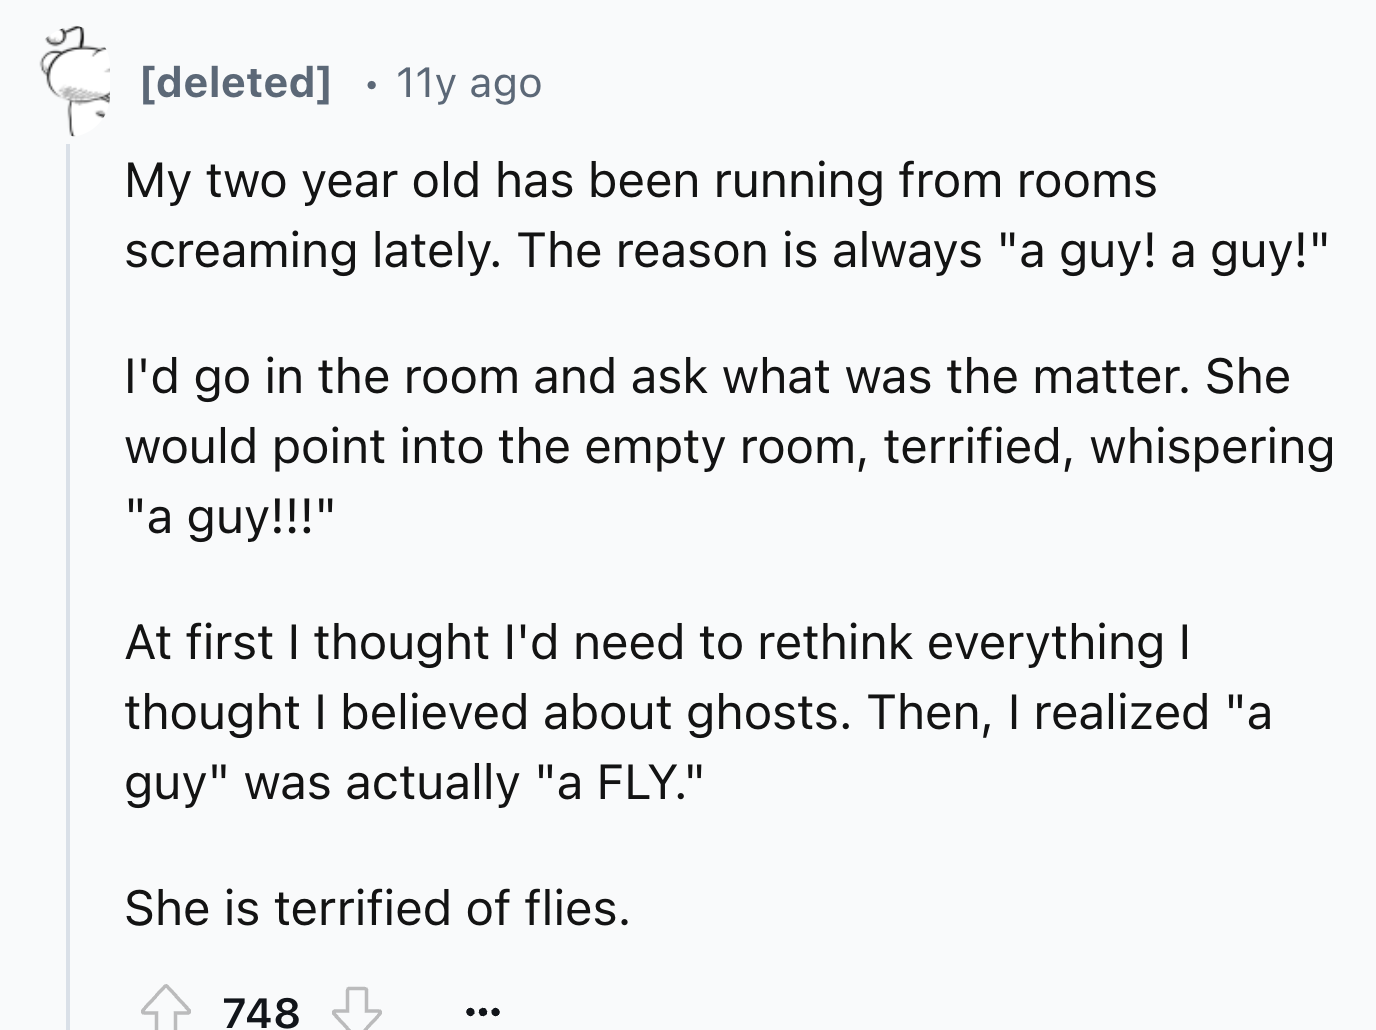 circle - deleted . 11y ago My two year old has been running from rooms screaming lately. The reason is always "a guy! a guy!" I'd go in the room and ask what was the matter. She would point into the empty room, terrified, whispering "a guy!!!" At first I 